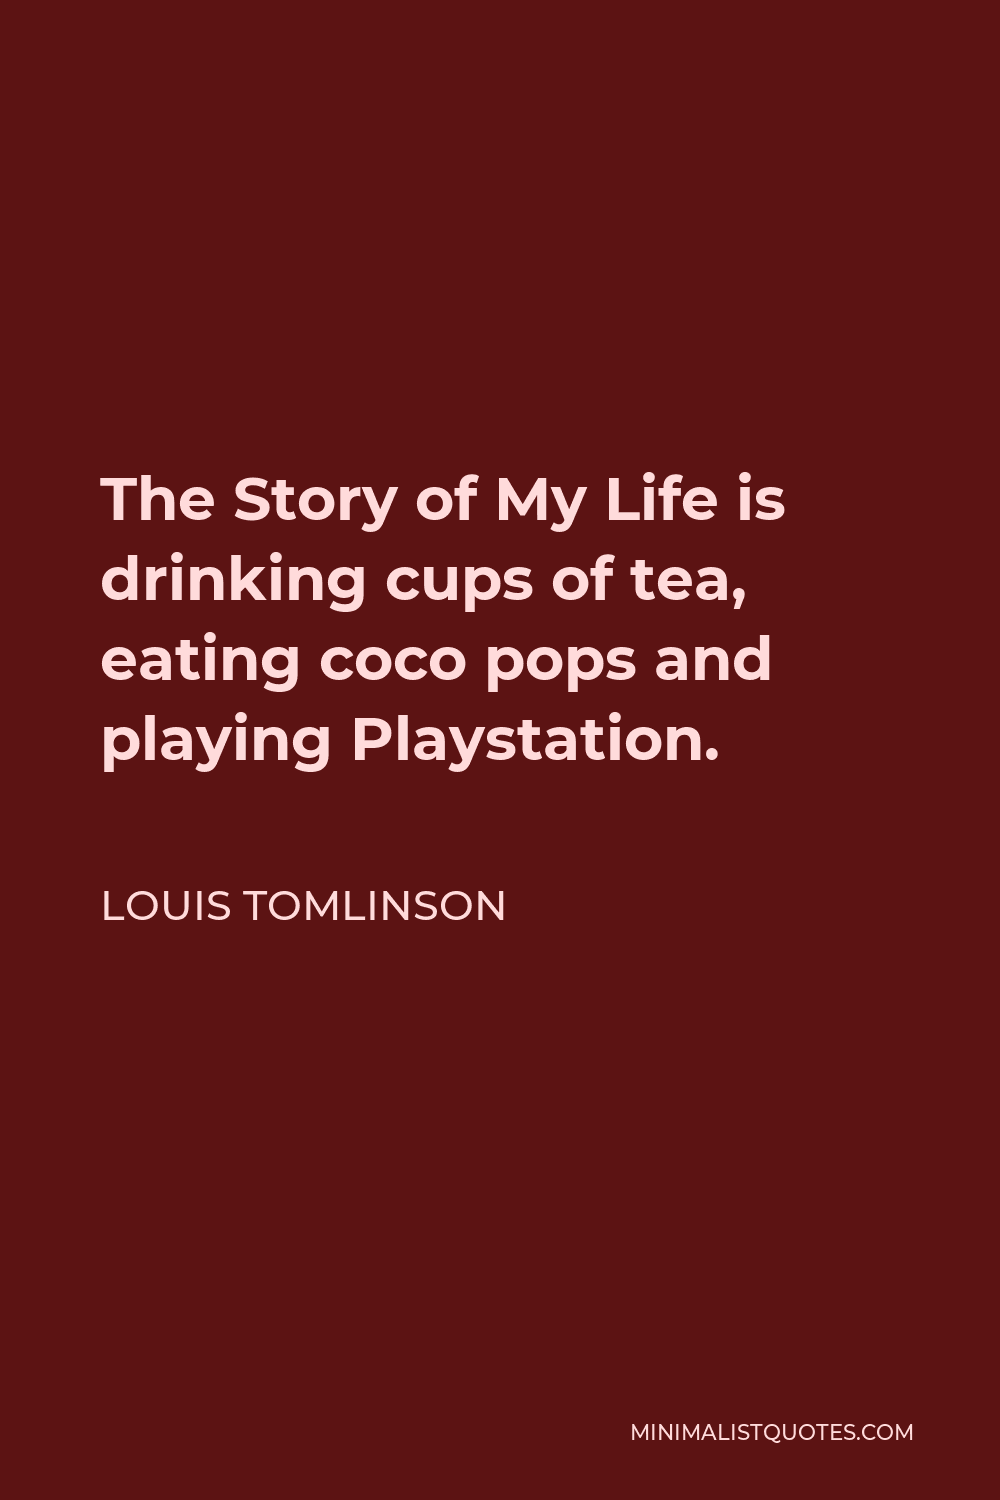 Louis Tomlinson Quote - The Story of My Life is drinking cups of tea, eating coco pops and playing Playstation.